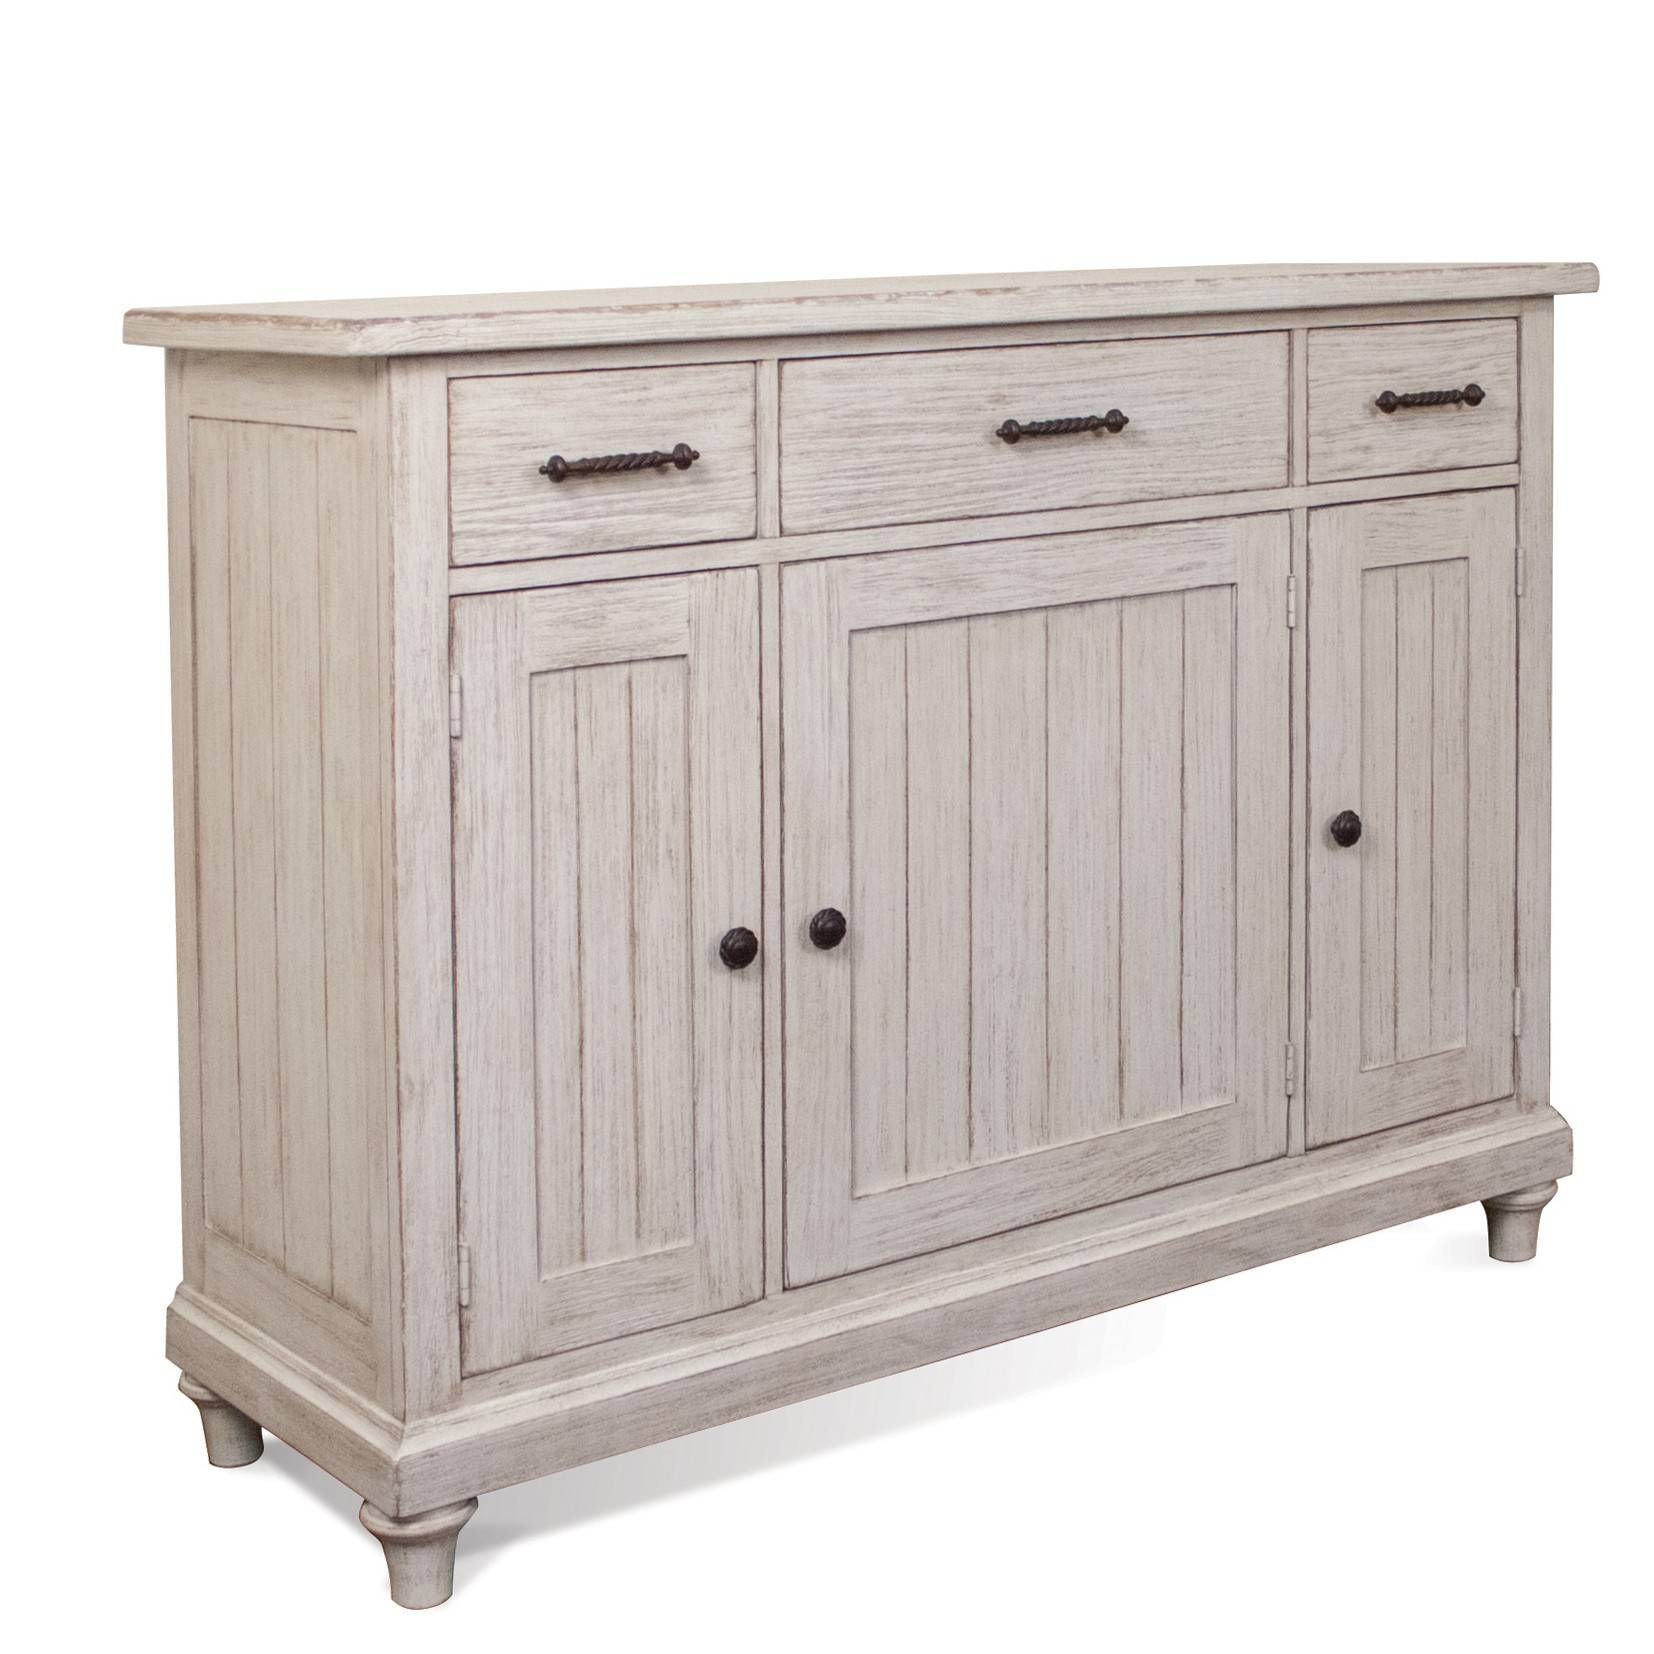 Aberdeen Wood Sideboard Server In Weathered Worn White | Humble Abode Within Current Server Sideboard Furniture (Photo 8 of 15)